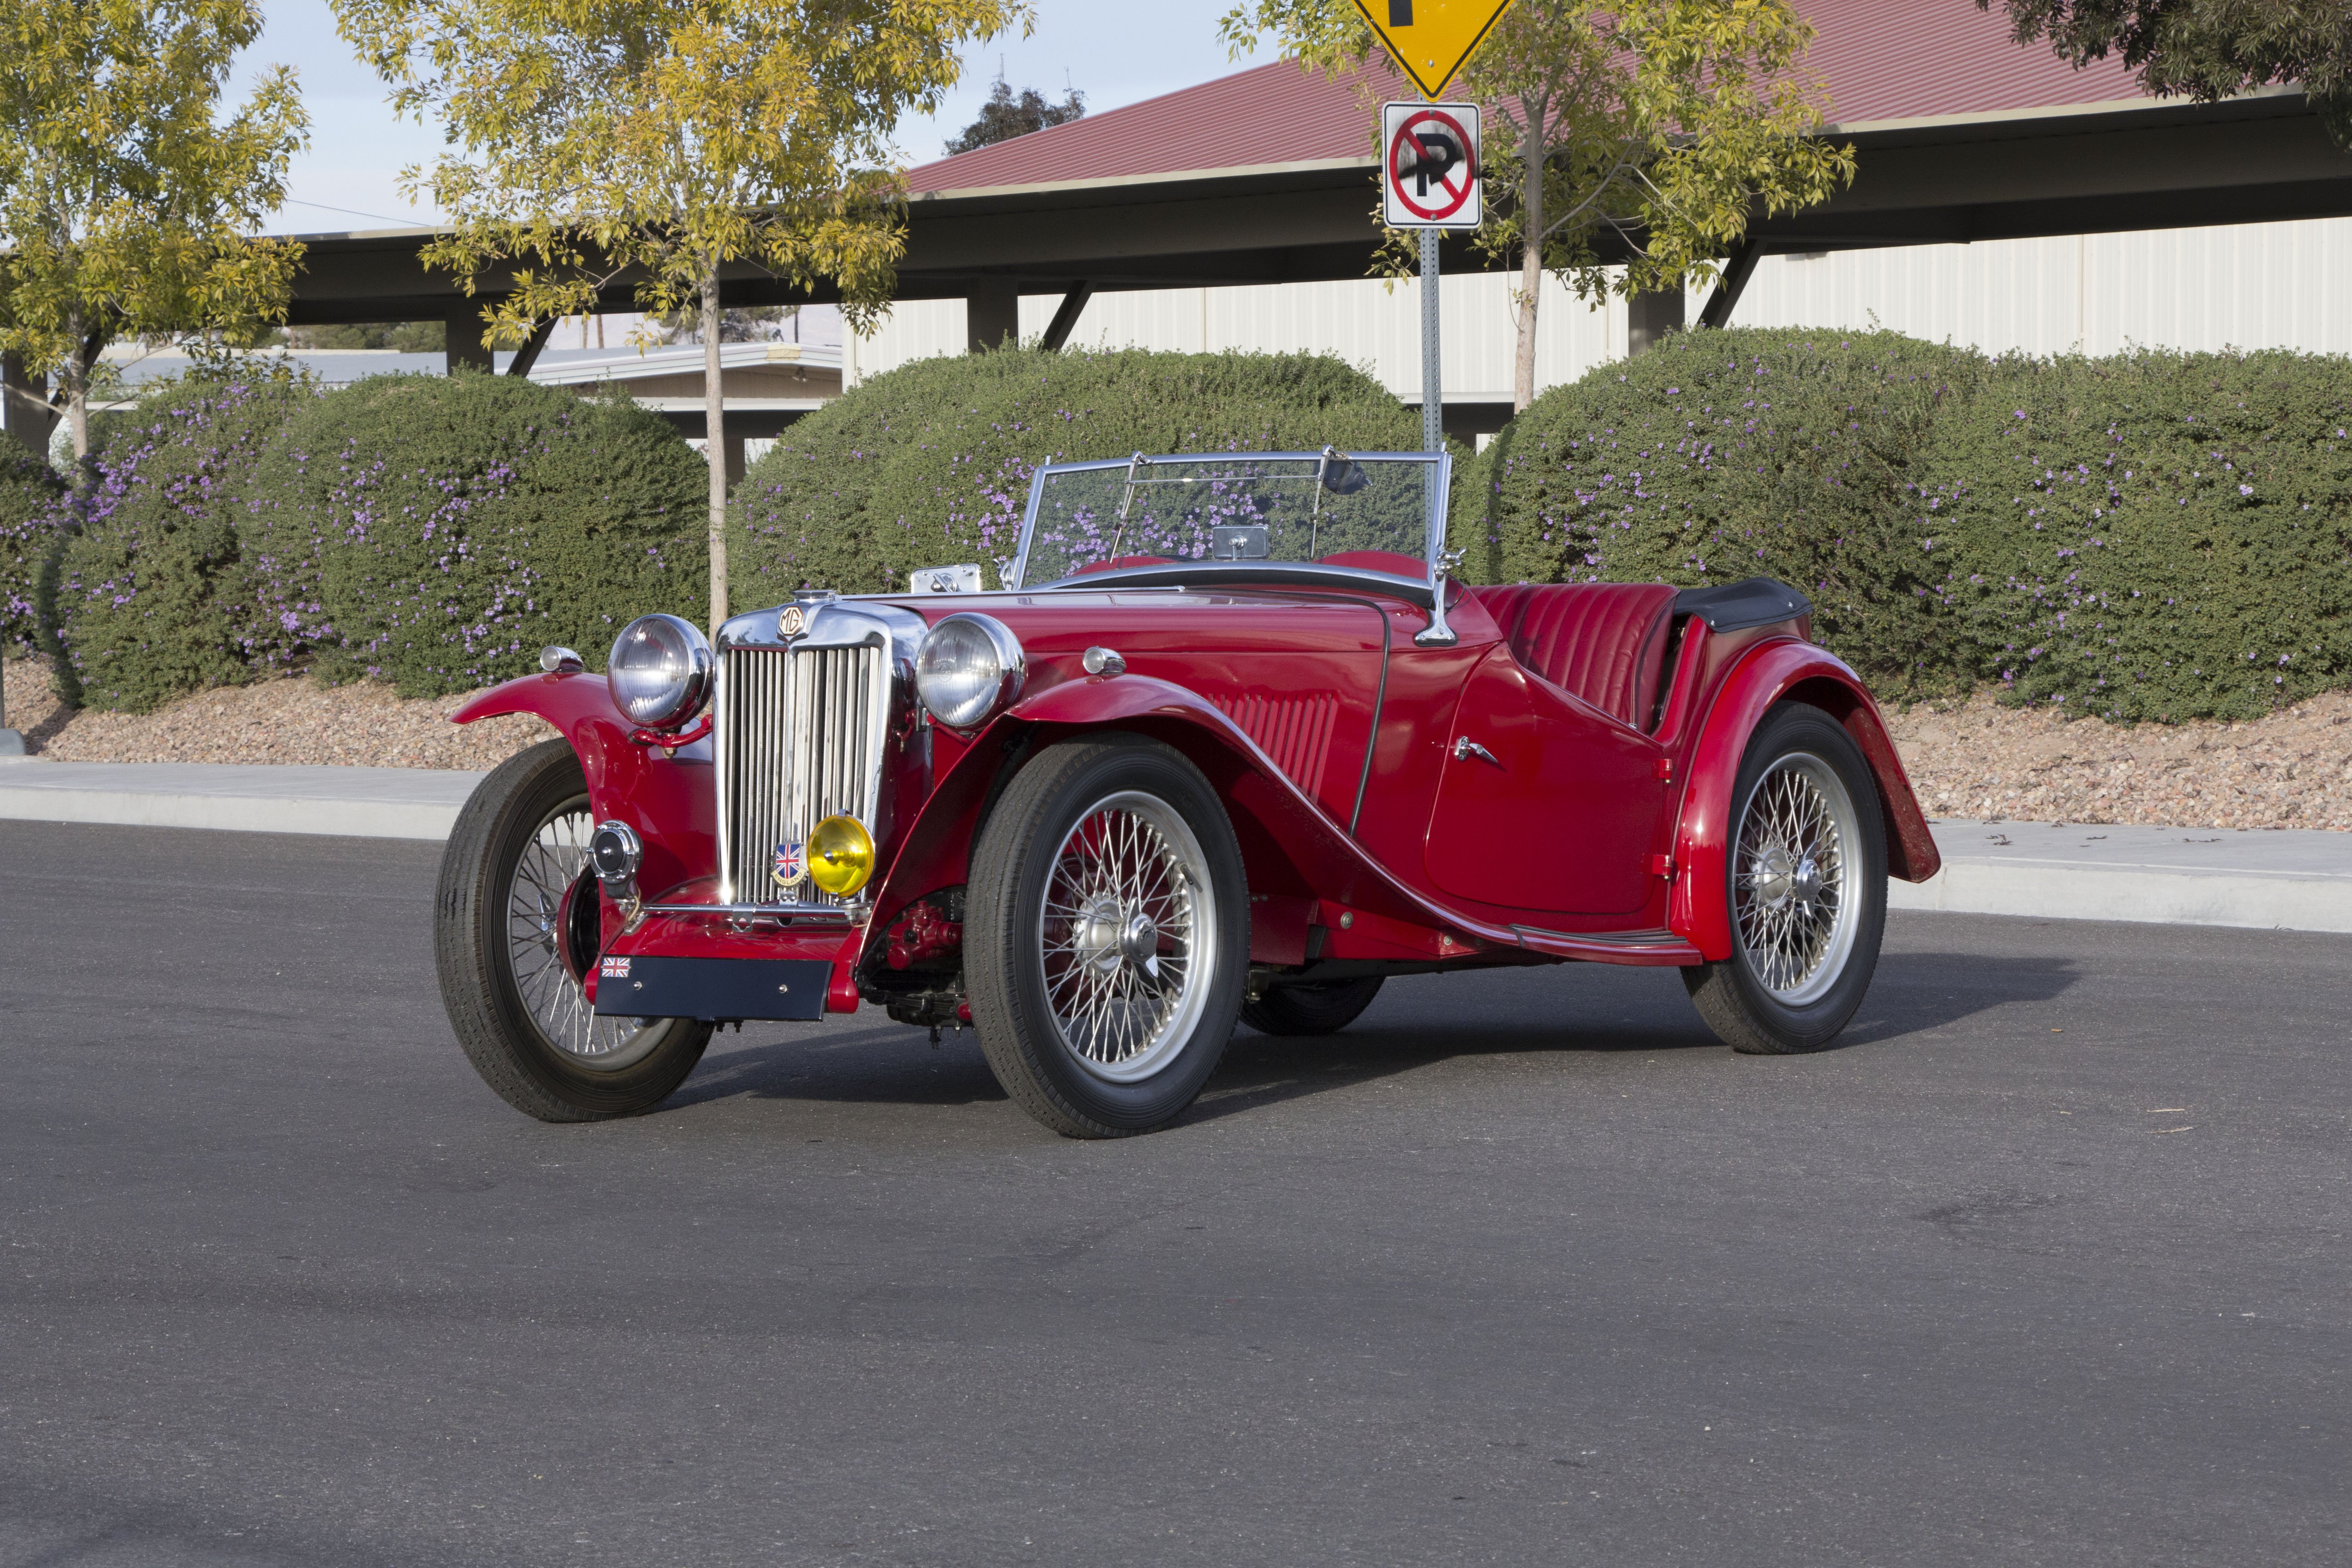 1948 Mg Tc Sport Roadster Red Classic Old Retro Vintage Original Uk 01 Wallpapers Hd